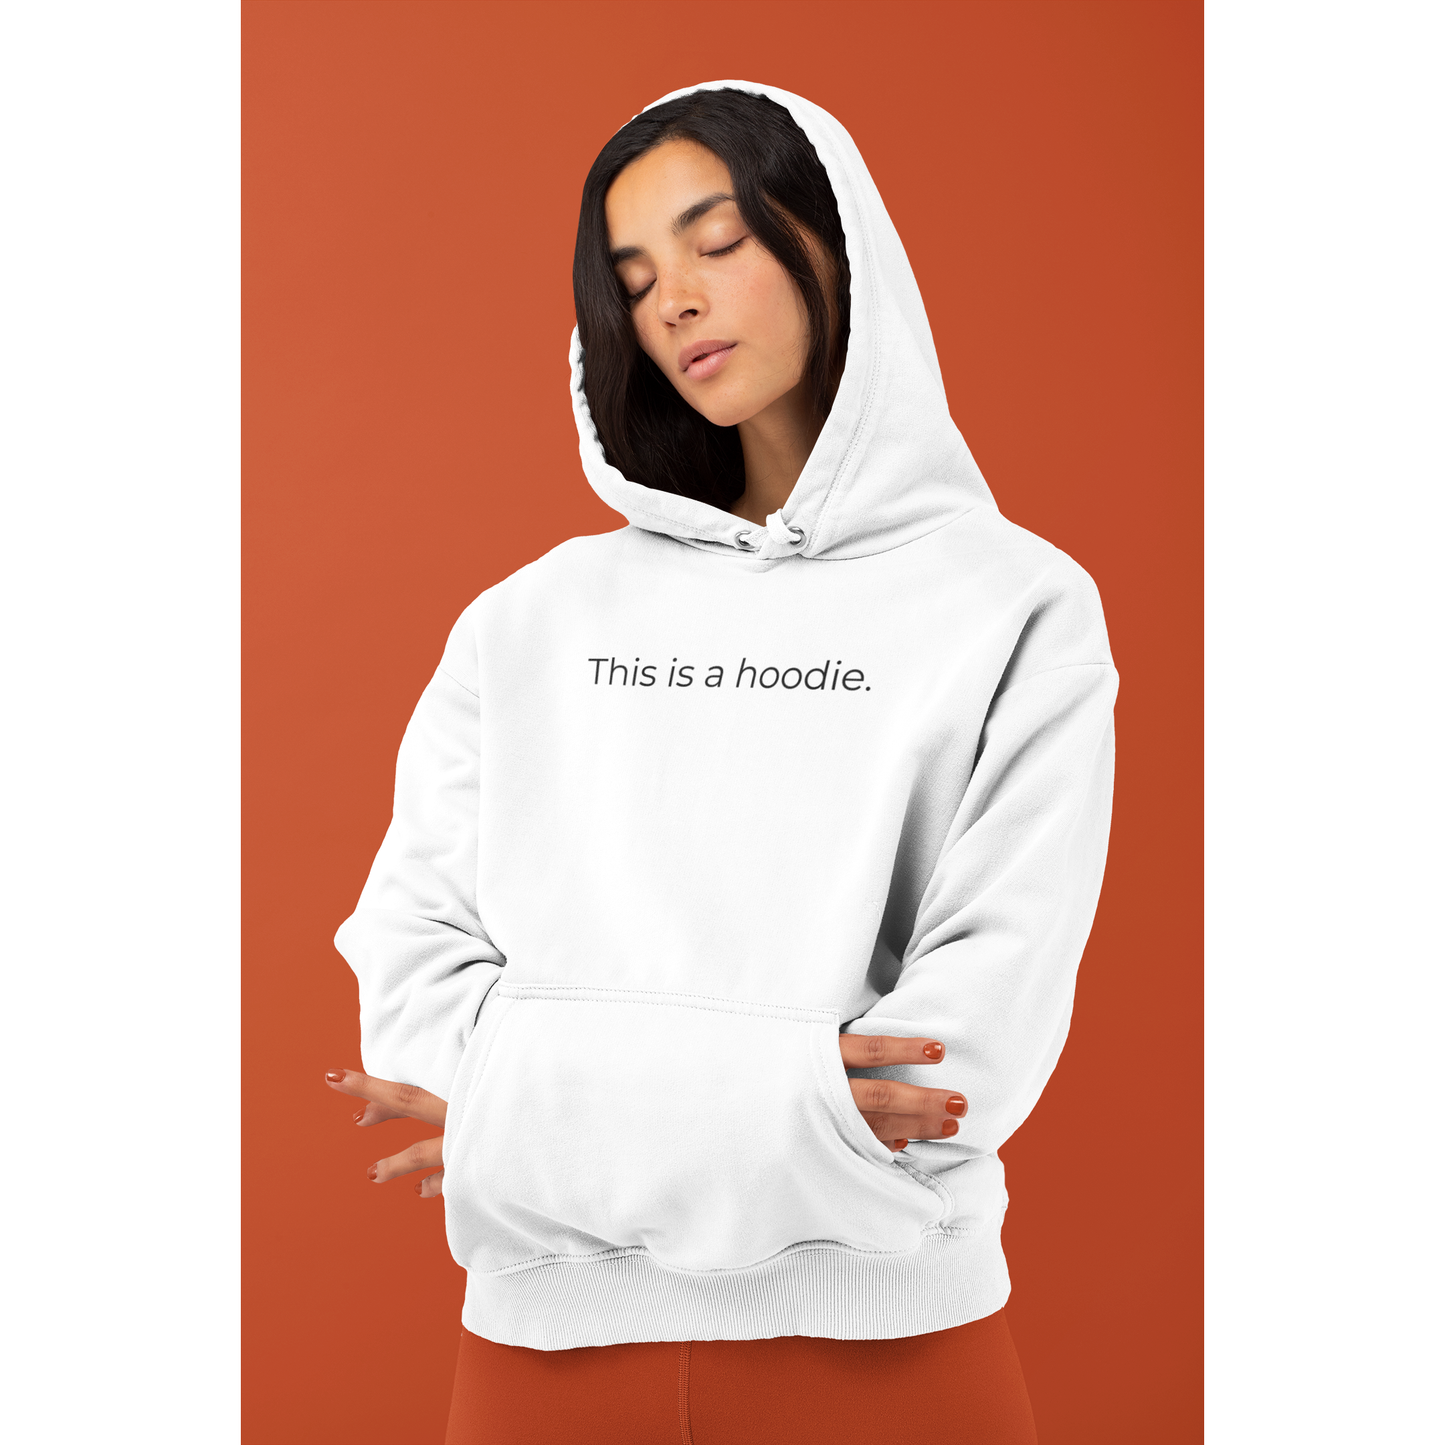 This is a hoodie.